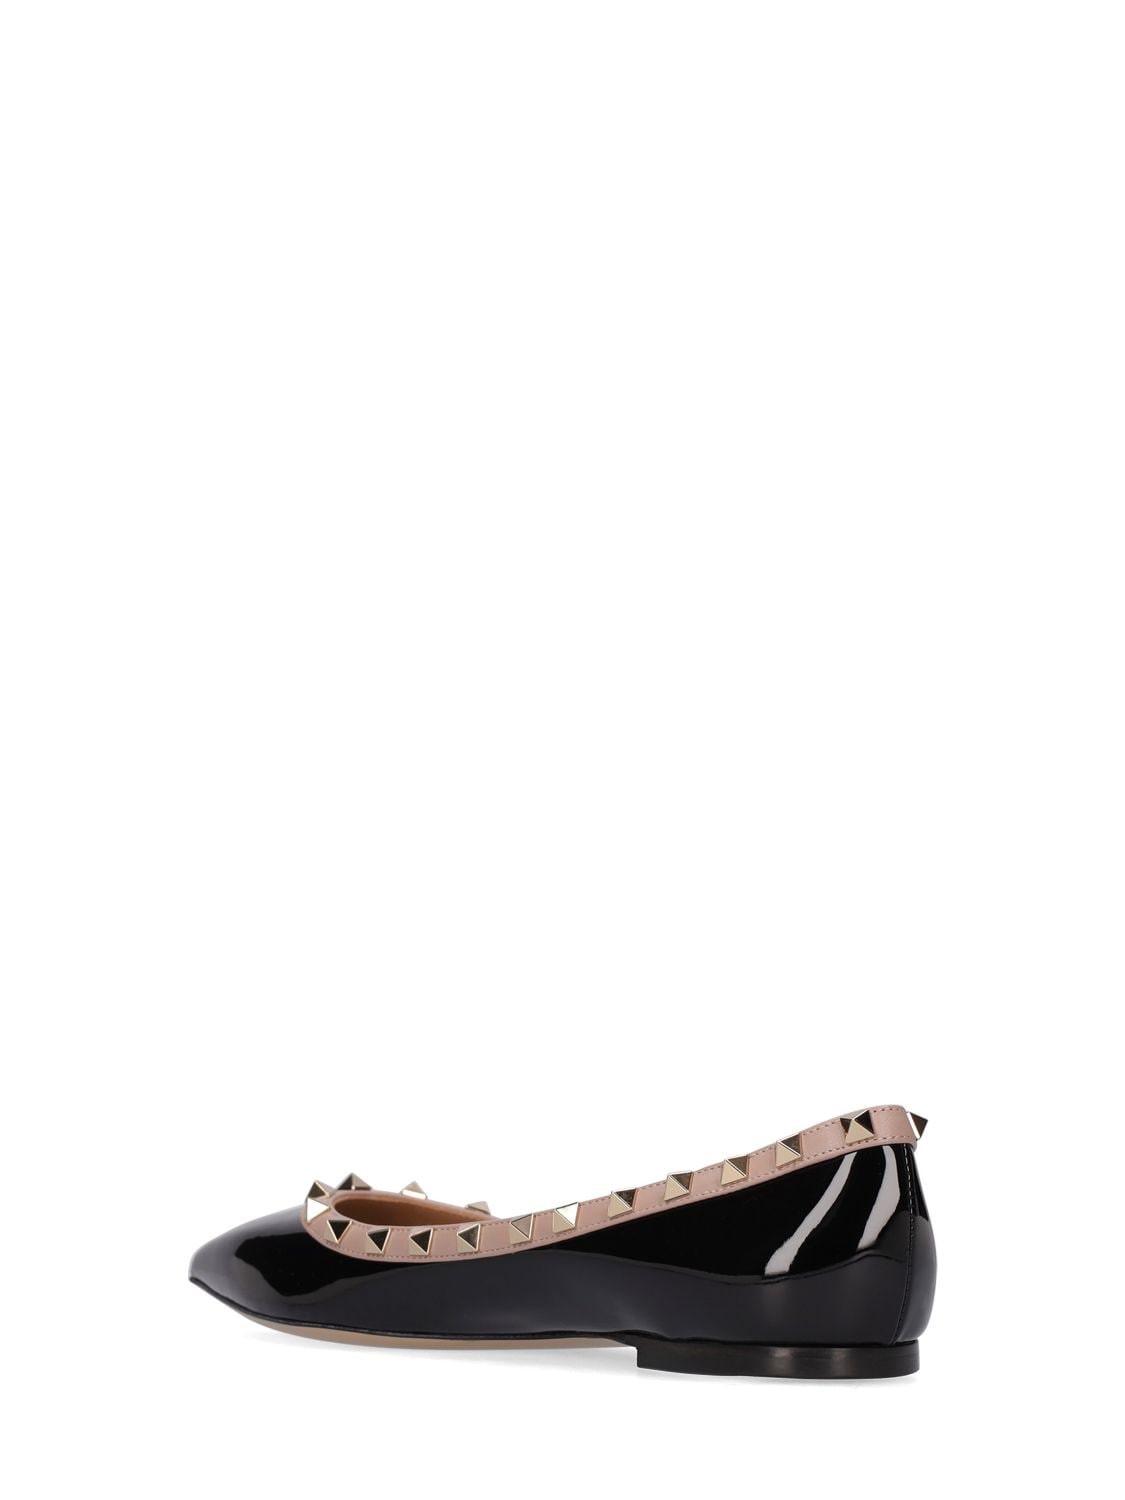 Shop Valentino 10mm Rockstud Patent Leather Flats In Black,poudre